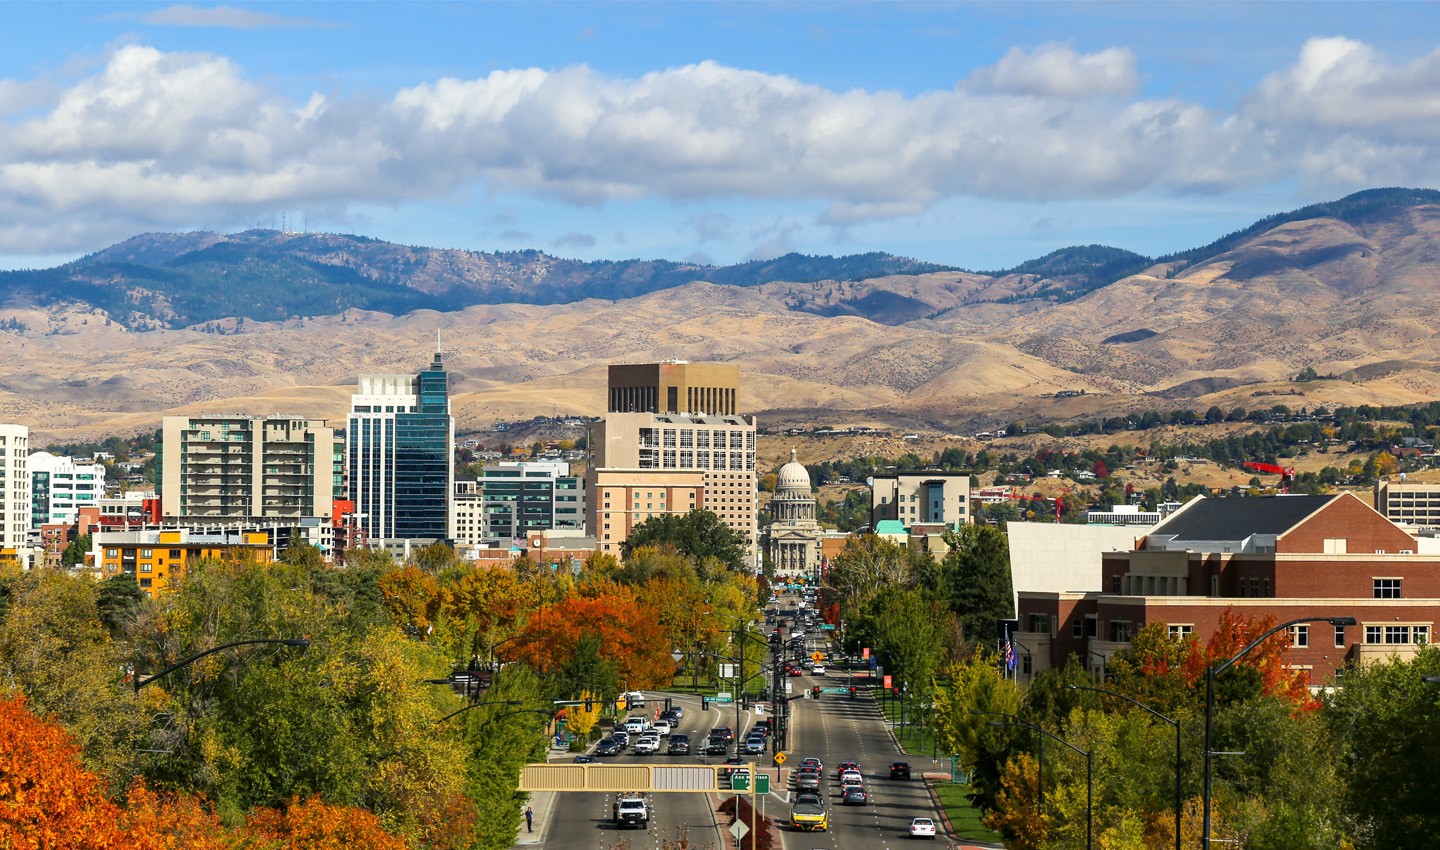 Drawing tens of thousands of new residents every year, Boise, Idaho, has emerged as one of the fastest growing cities in the USA.